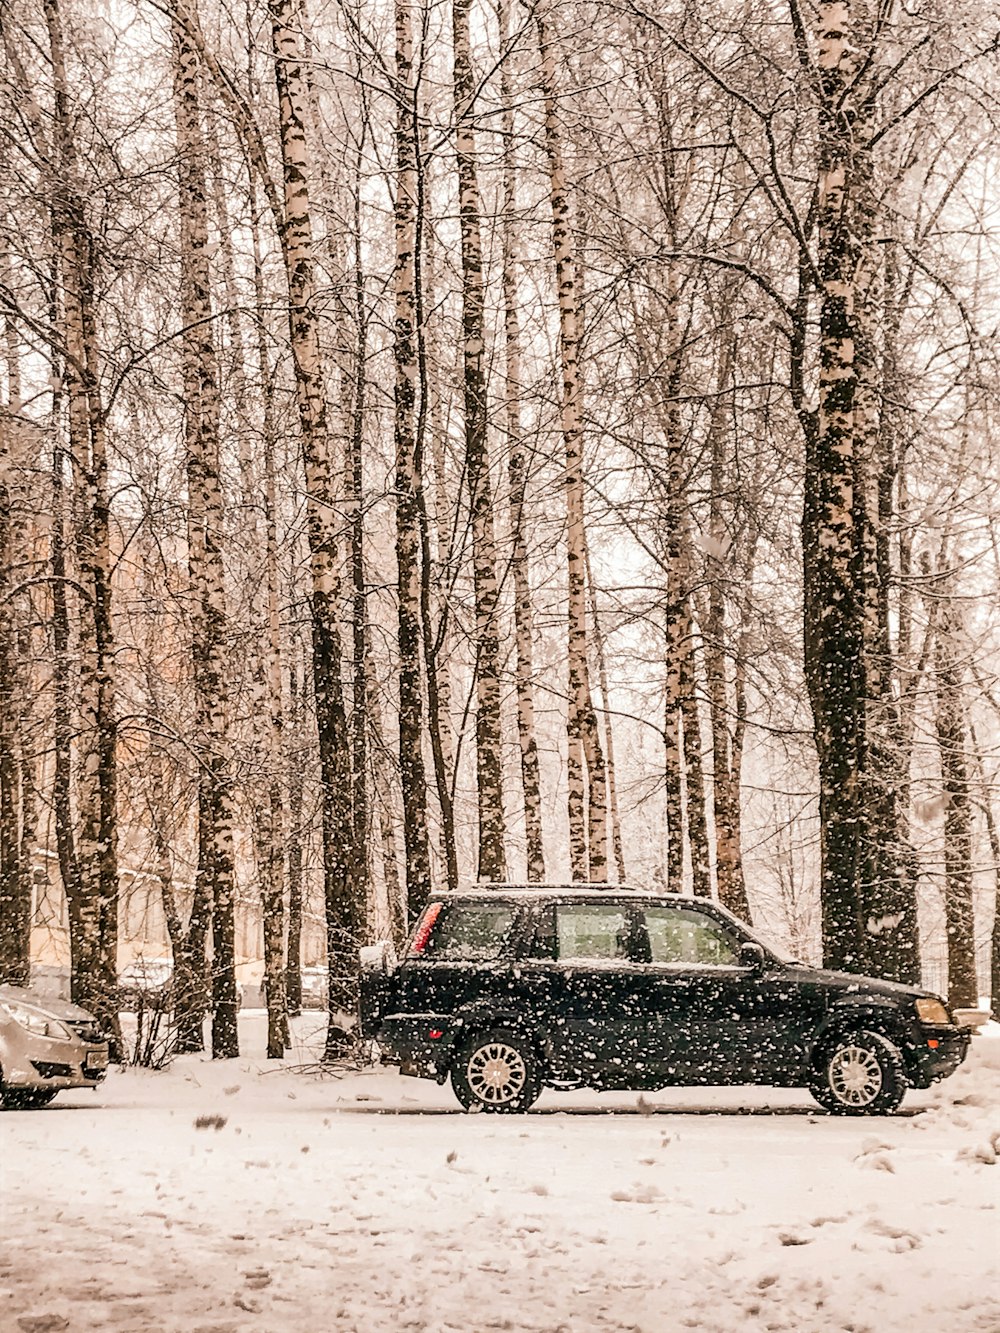 black suv on snow covered road in between bare trees during daytime